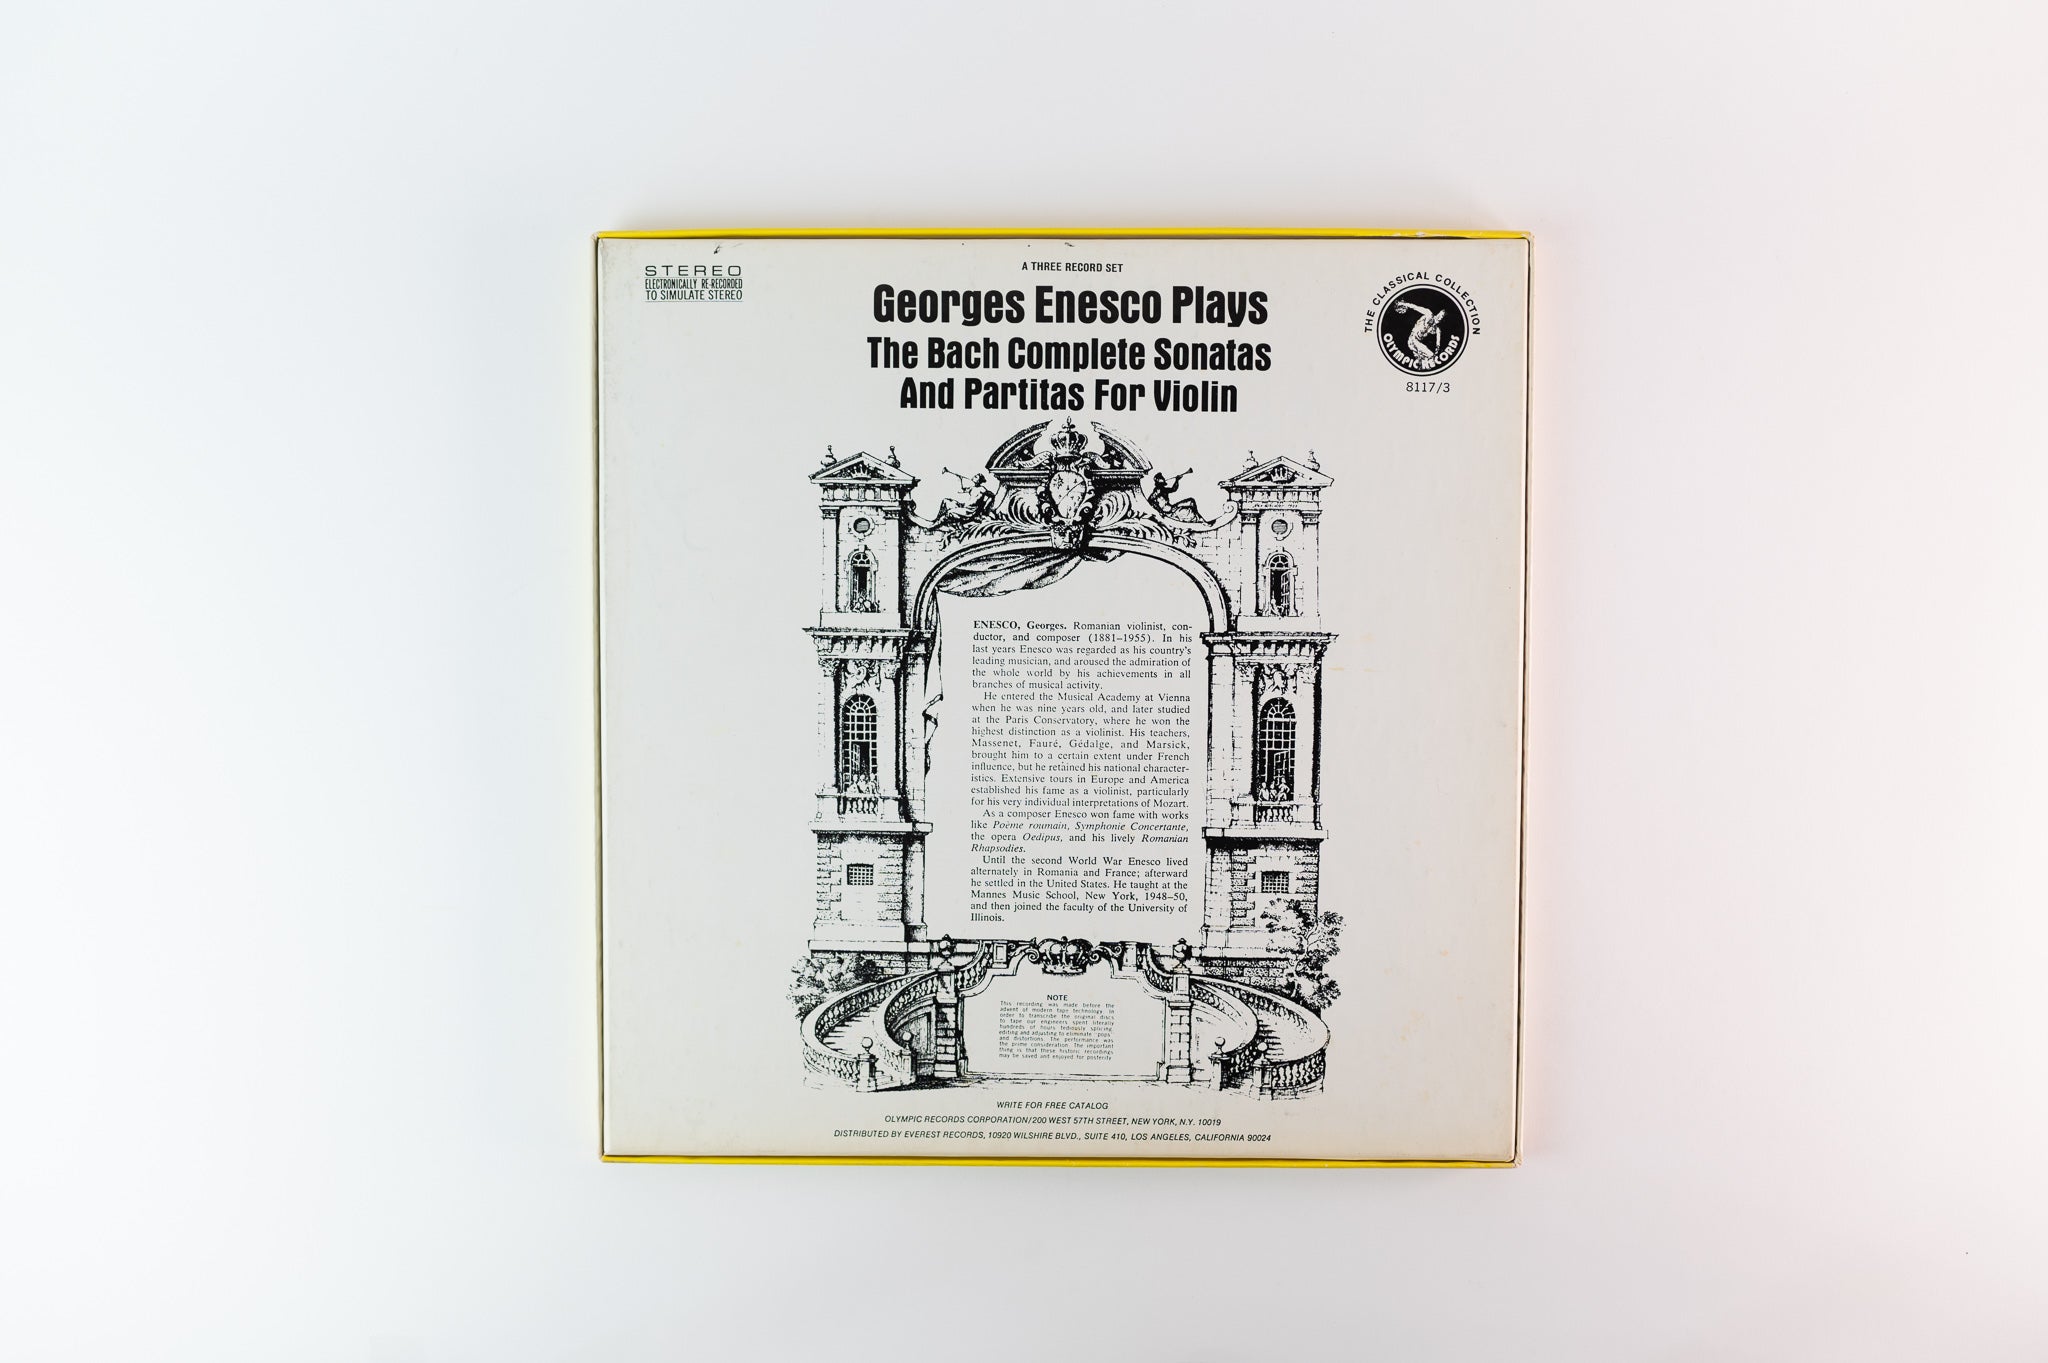 Johann Sebastian Bach, Georges Enesco  - The Bach Complete Sonatas And Partitas For Violin on Olympic